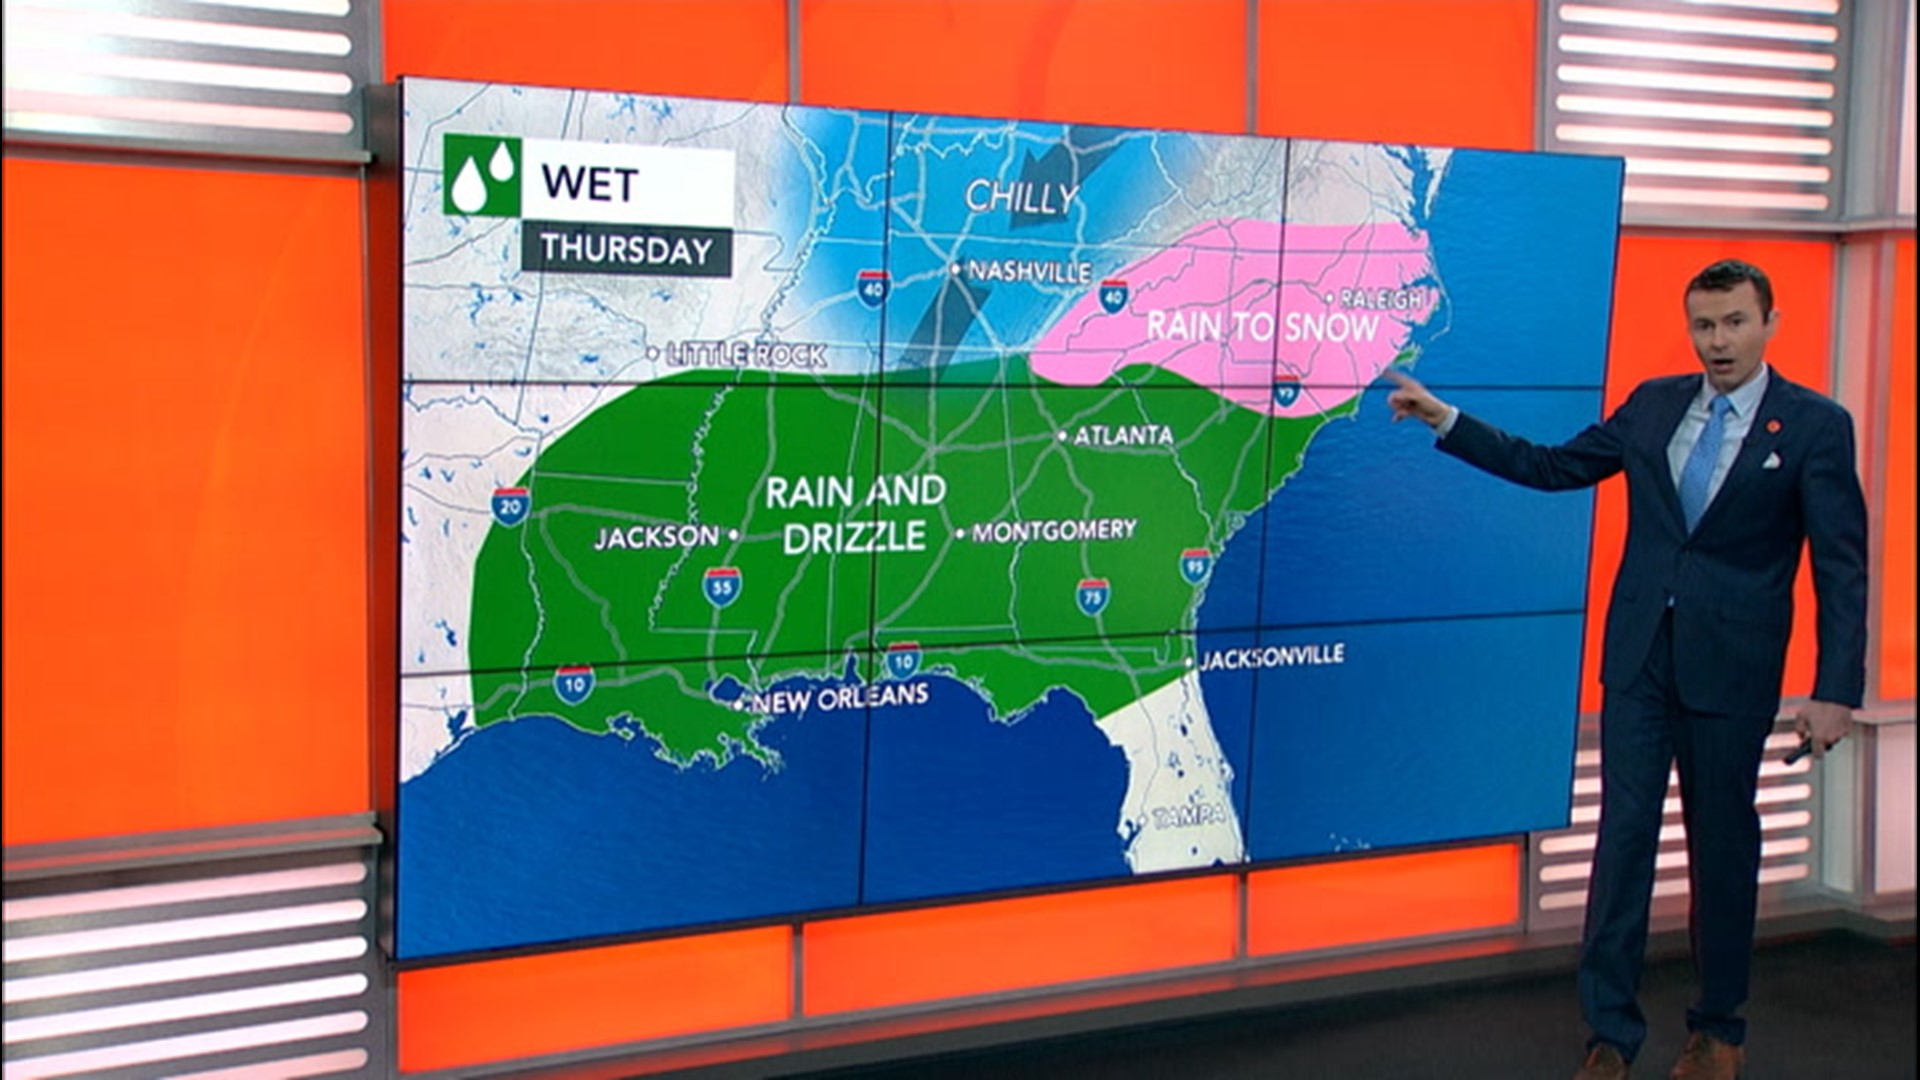 It's been a wet couple of weeks for the South, but some wintry precipitation may arrive and cause trouble in parts of the region later this week.